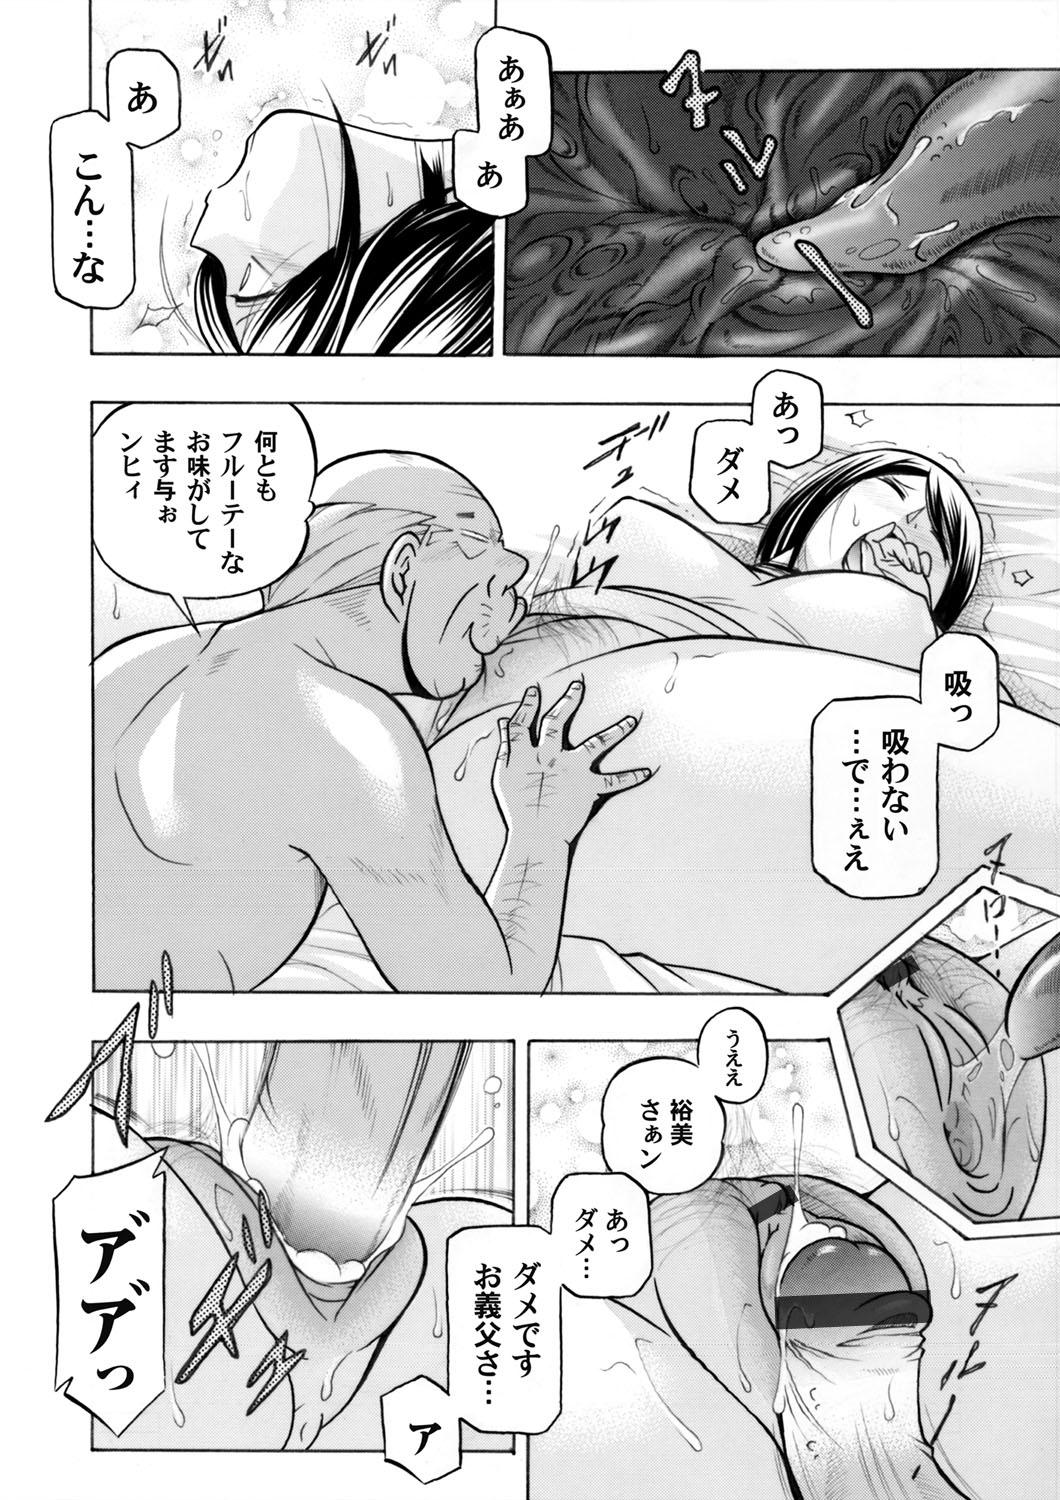 Bang COMIC Magnum Vol. 65 Leather - Page 5